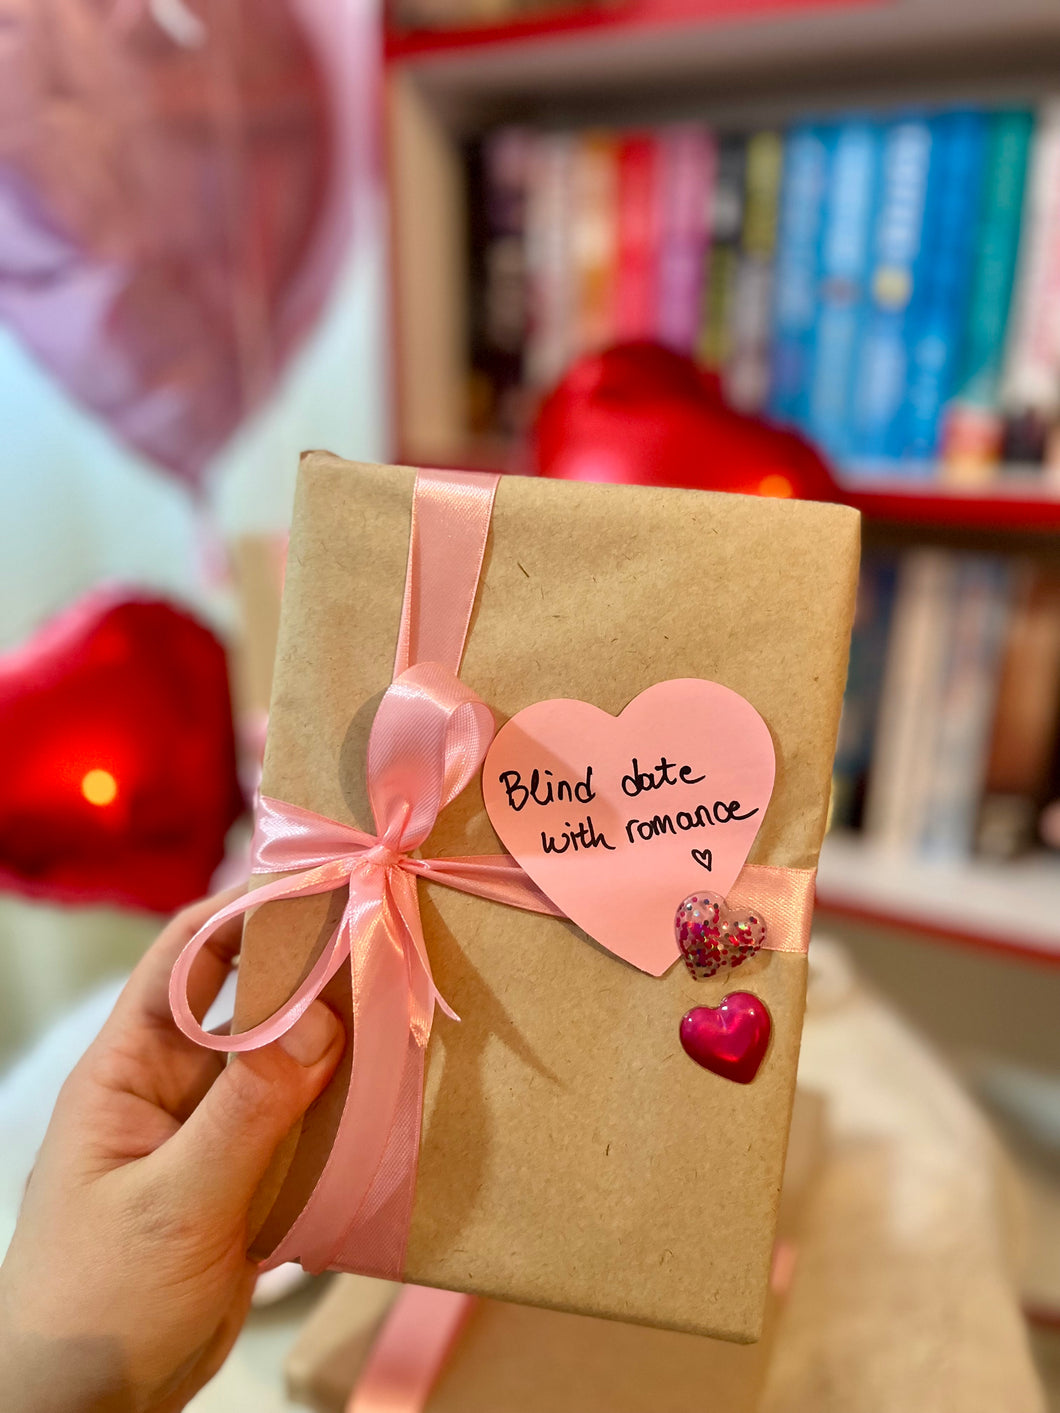 A blind date with a book